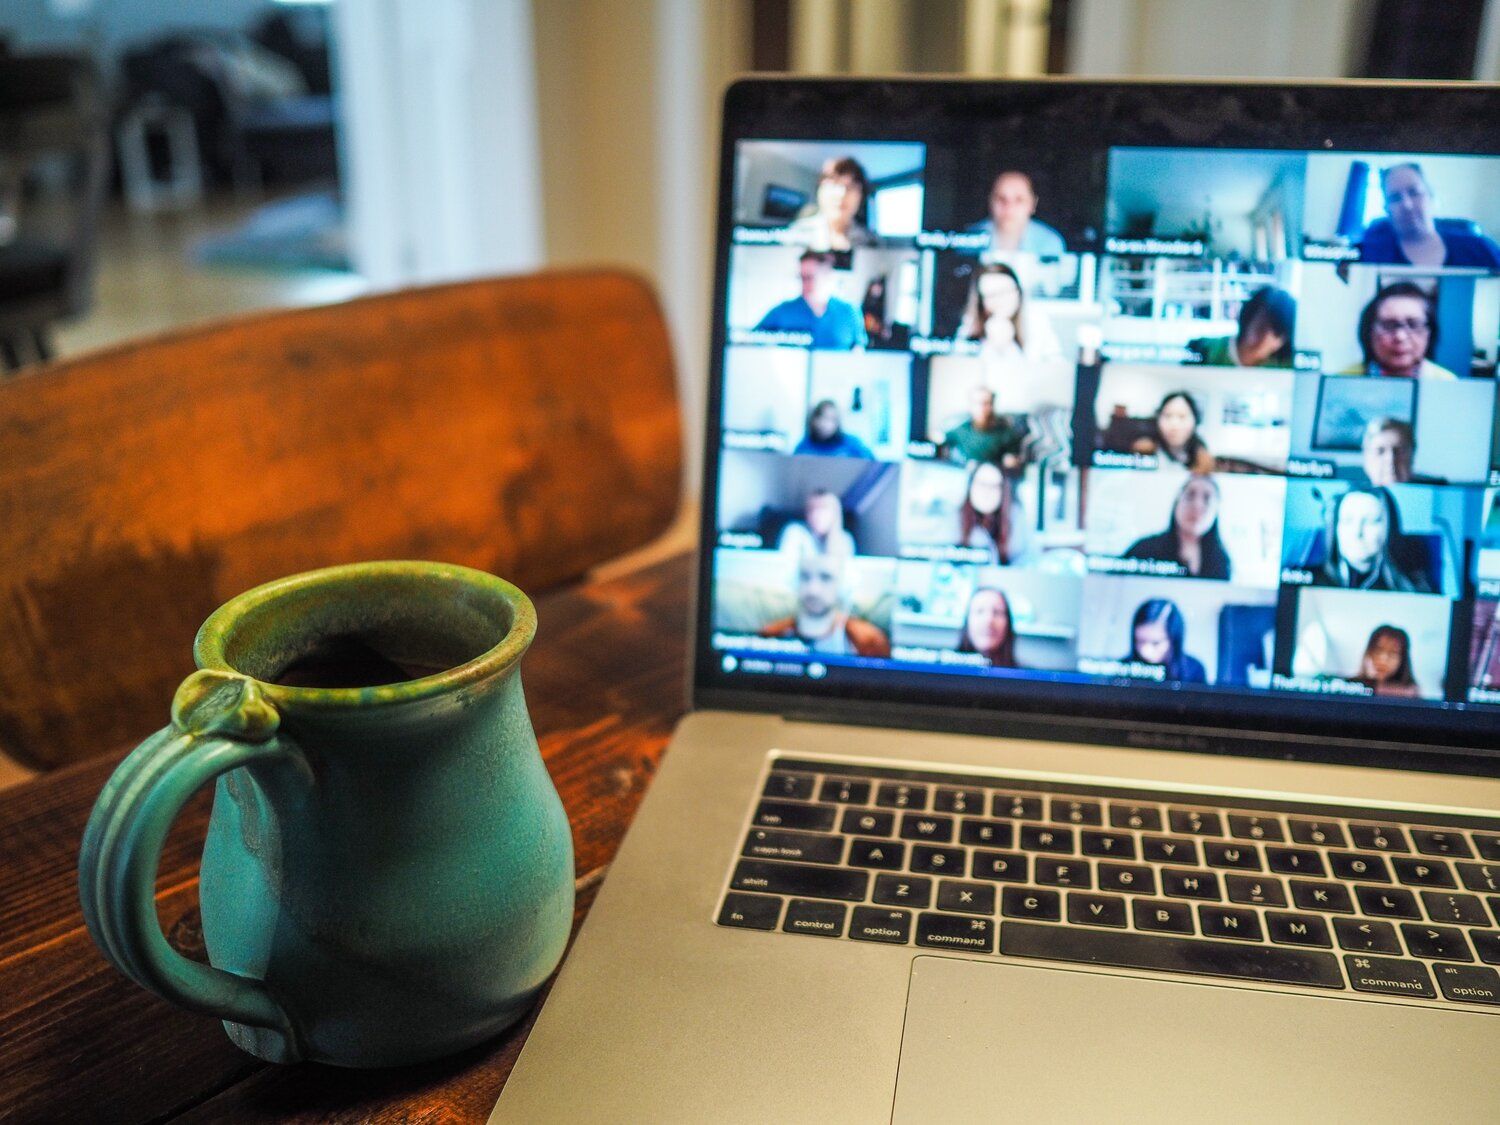 A photograph of an open laptop displaying a video chat with over 20 people. A mug is next to the laptop.